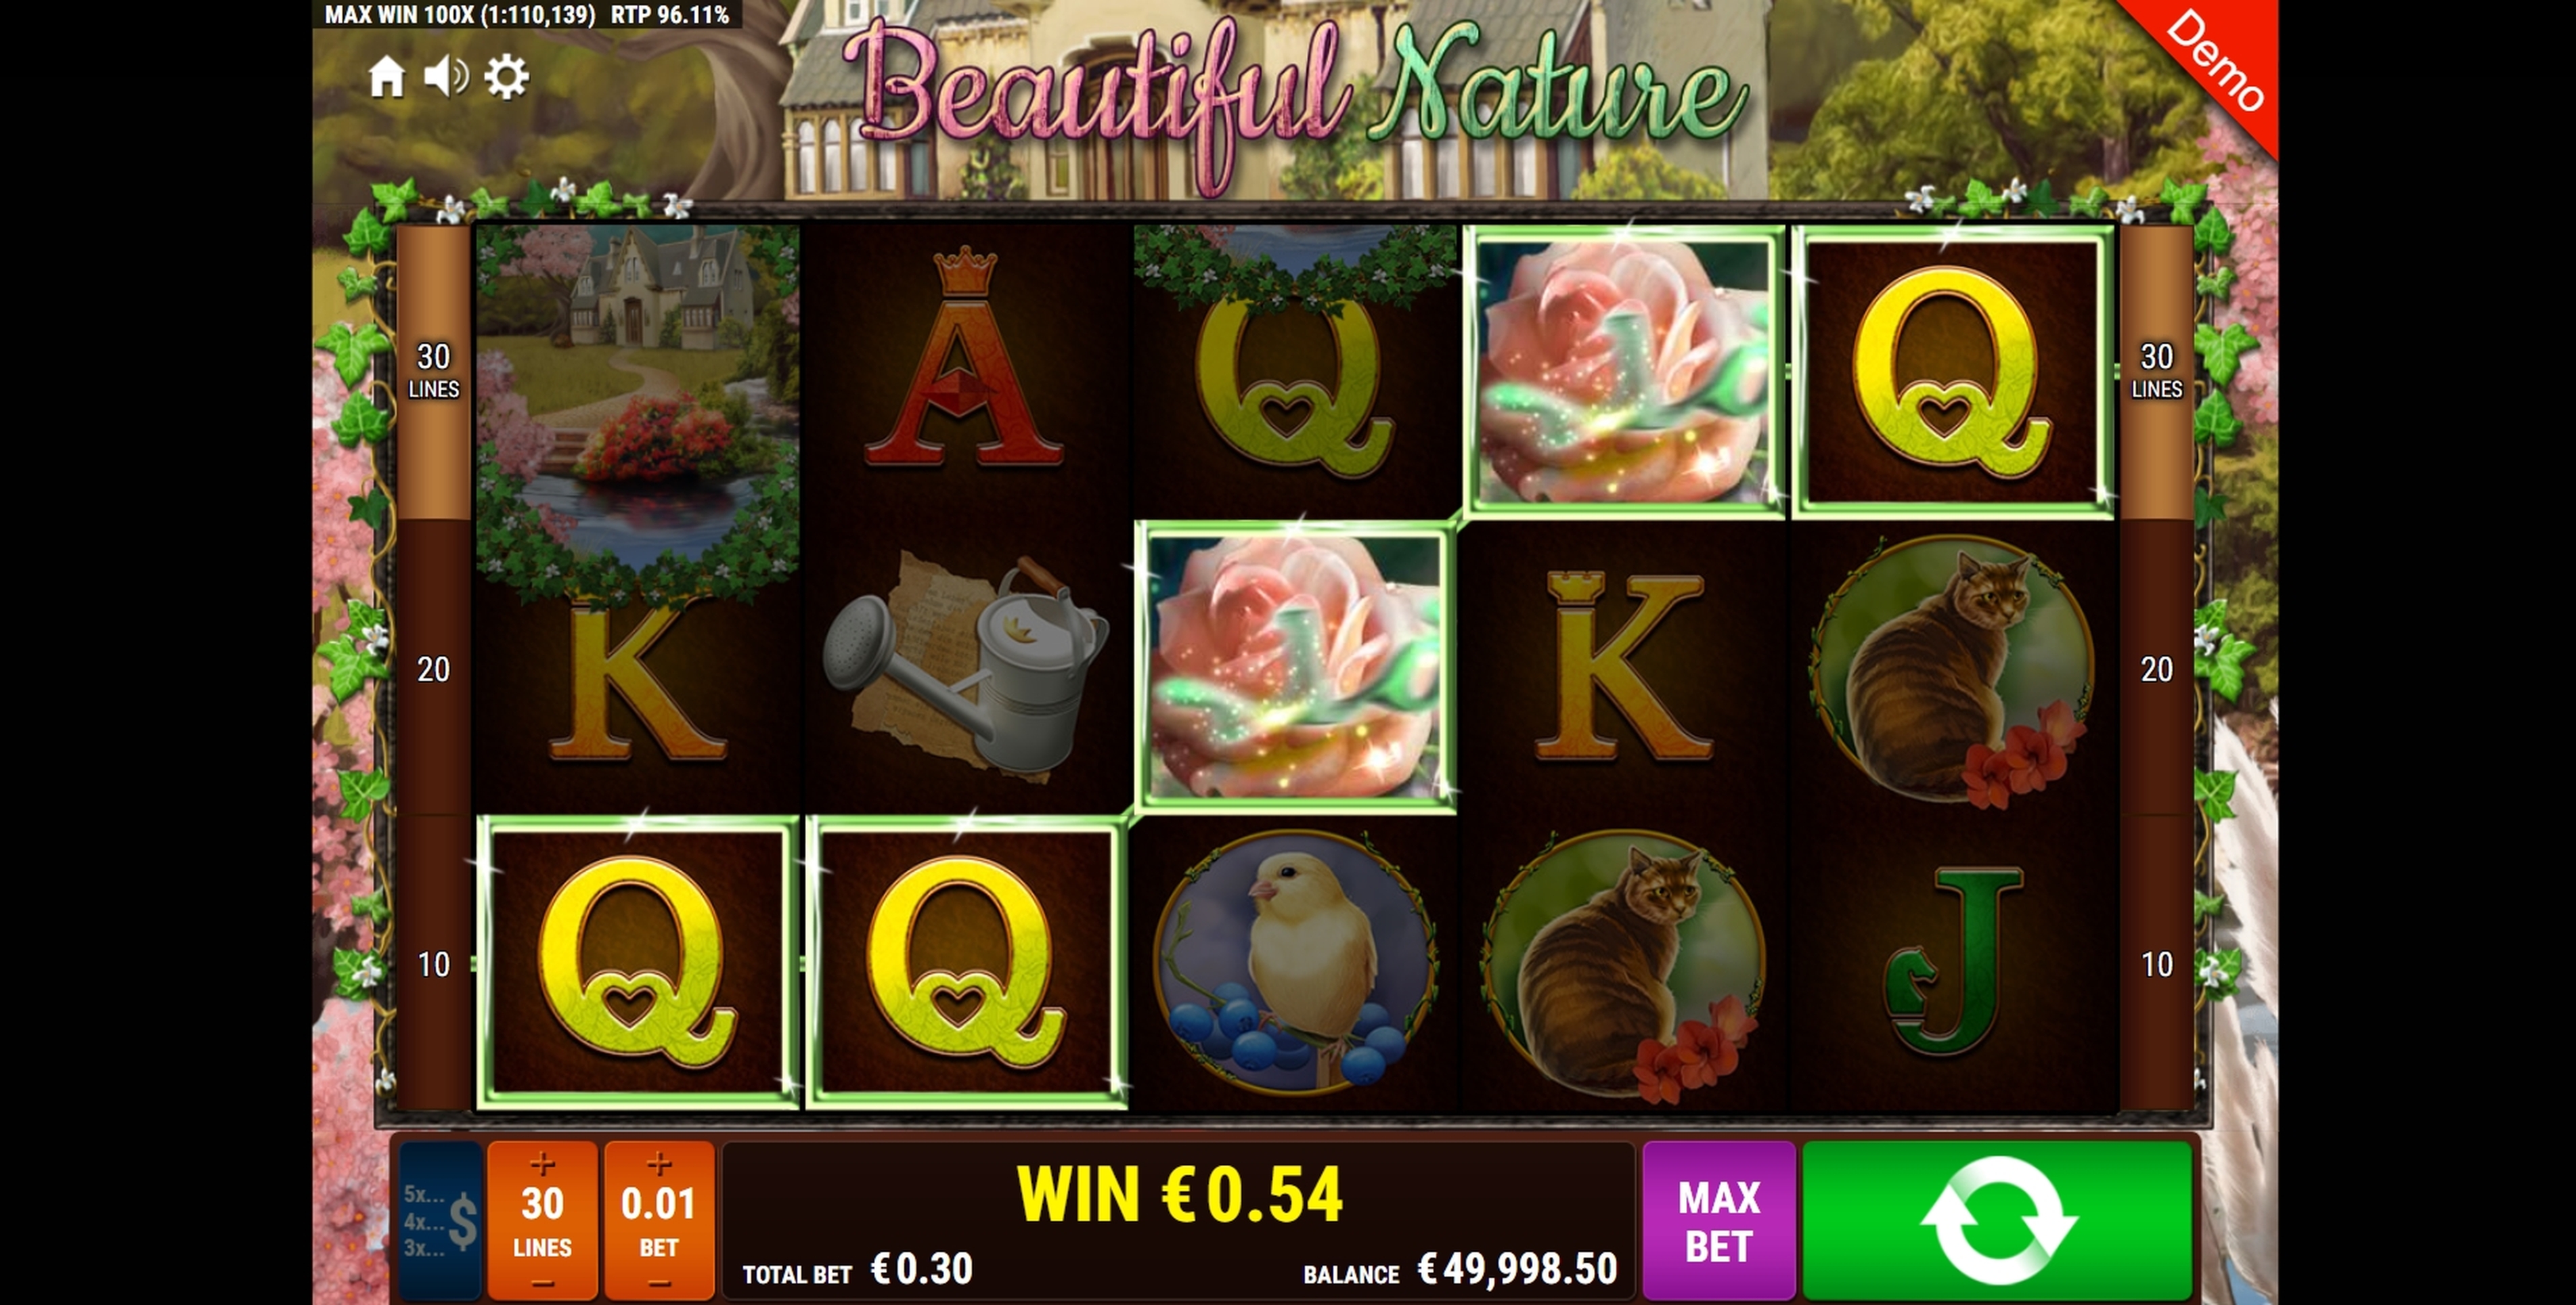 Win Money in Beautiful Nature Free Slot Game by Bally Wulff